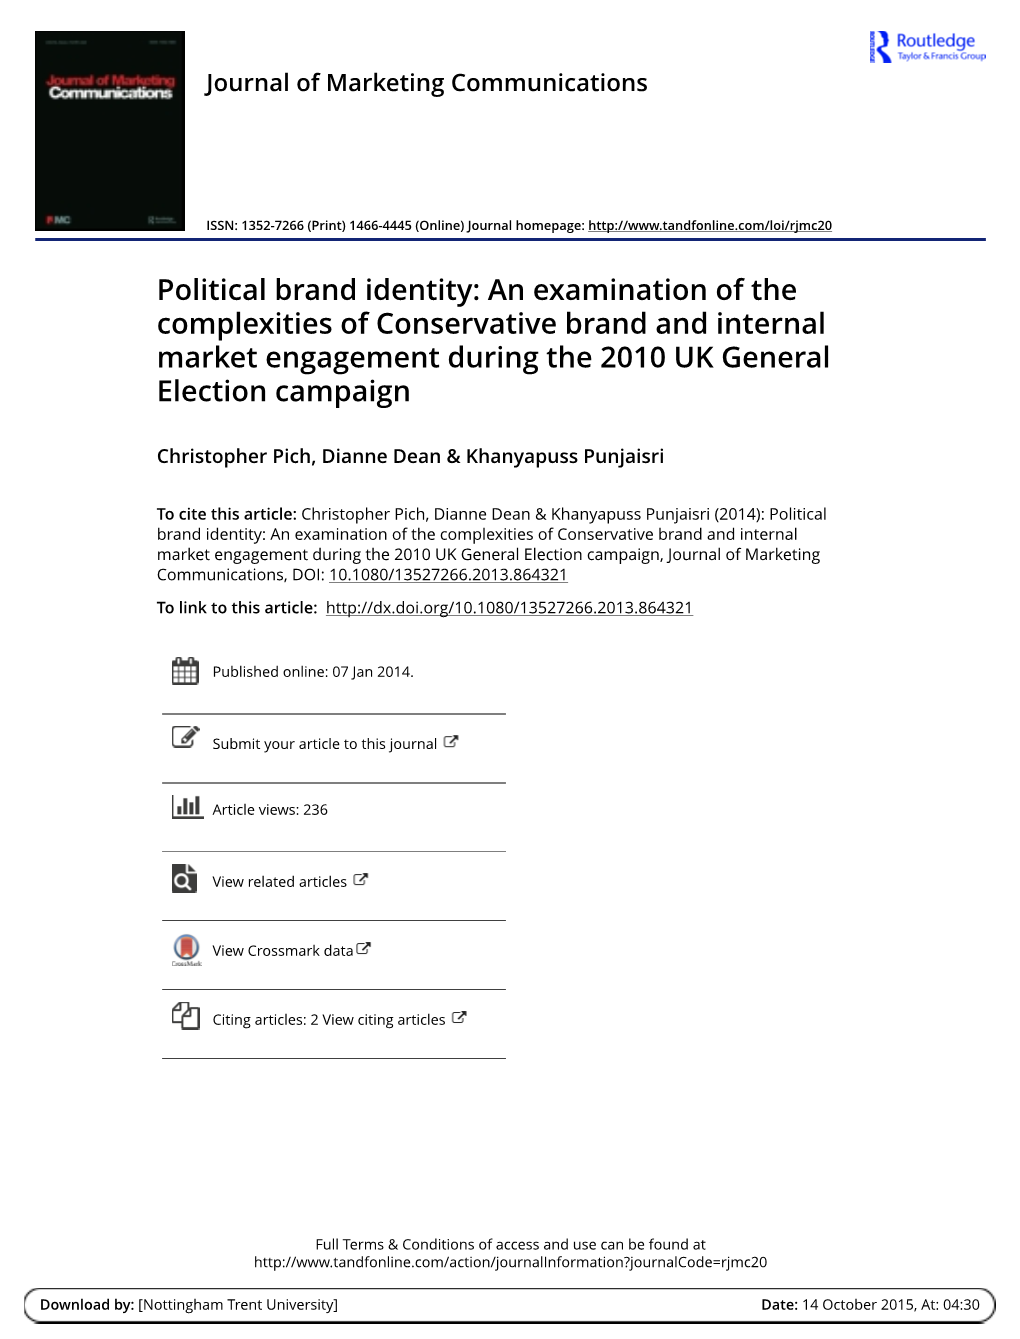 Political Brand Identity: an Examination of the Complexities of Conservative Brand and Internal Market Engagement During the 2010 UK General Election Campaign